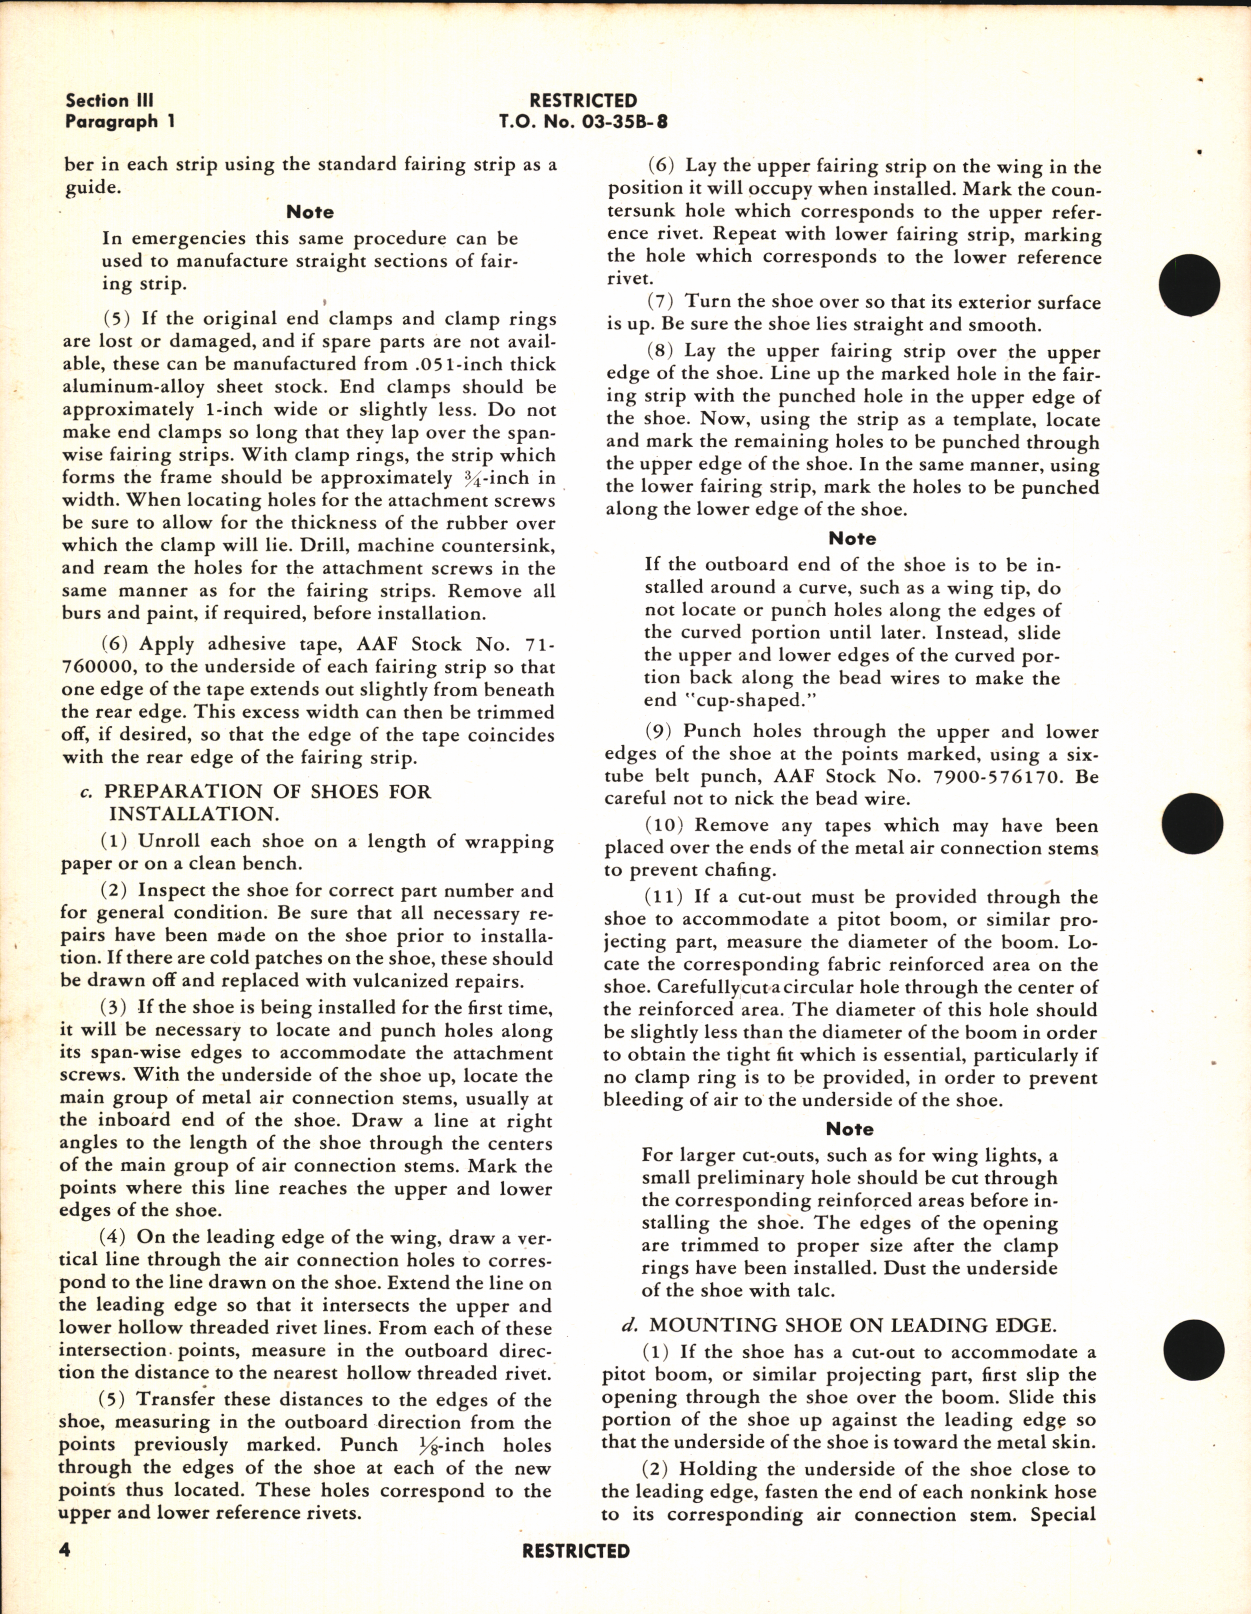 Sample page 8 from AirCorps Library document: Handbook of Instructions for Installation, Repair, and Storage of De-Icer Shoes